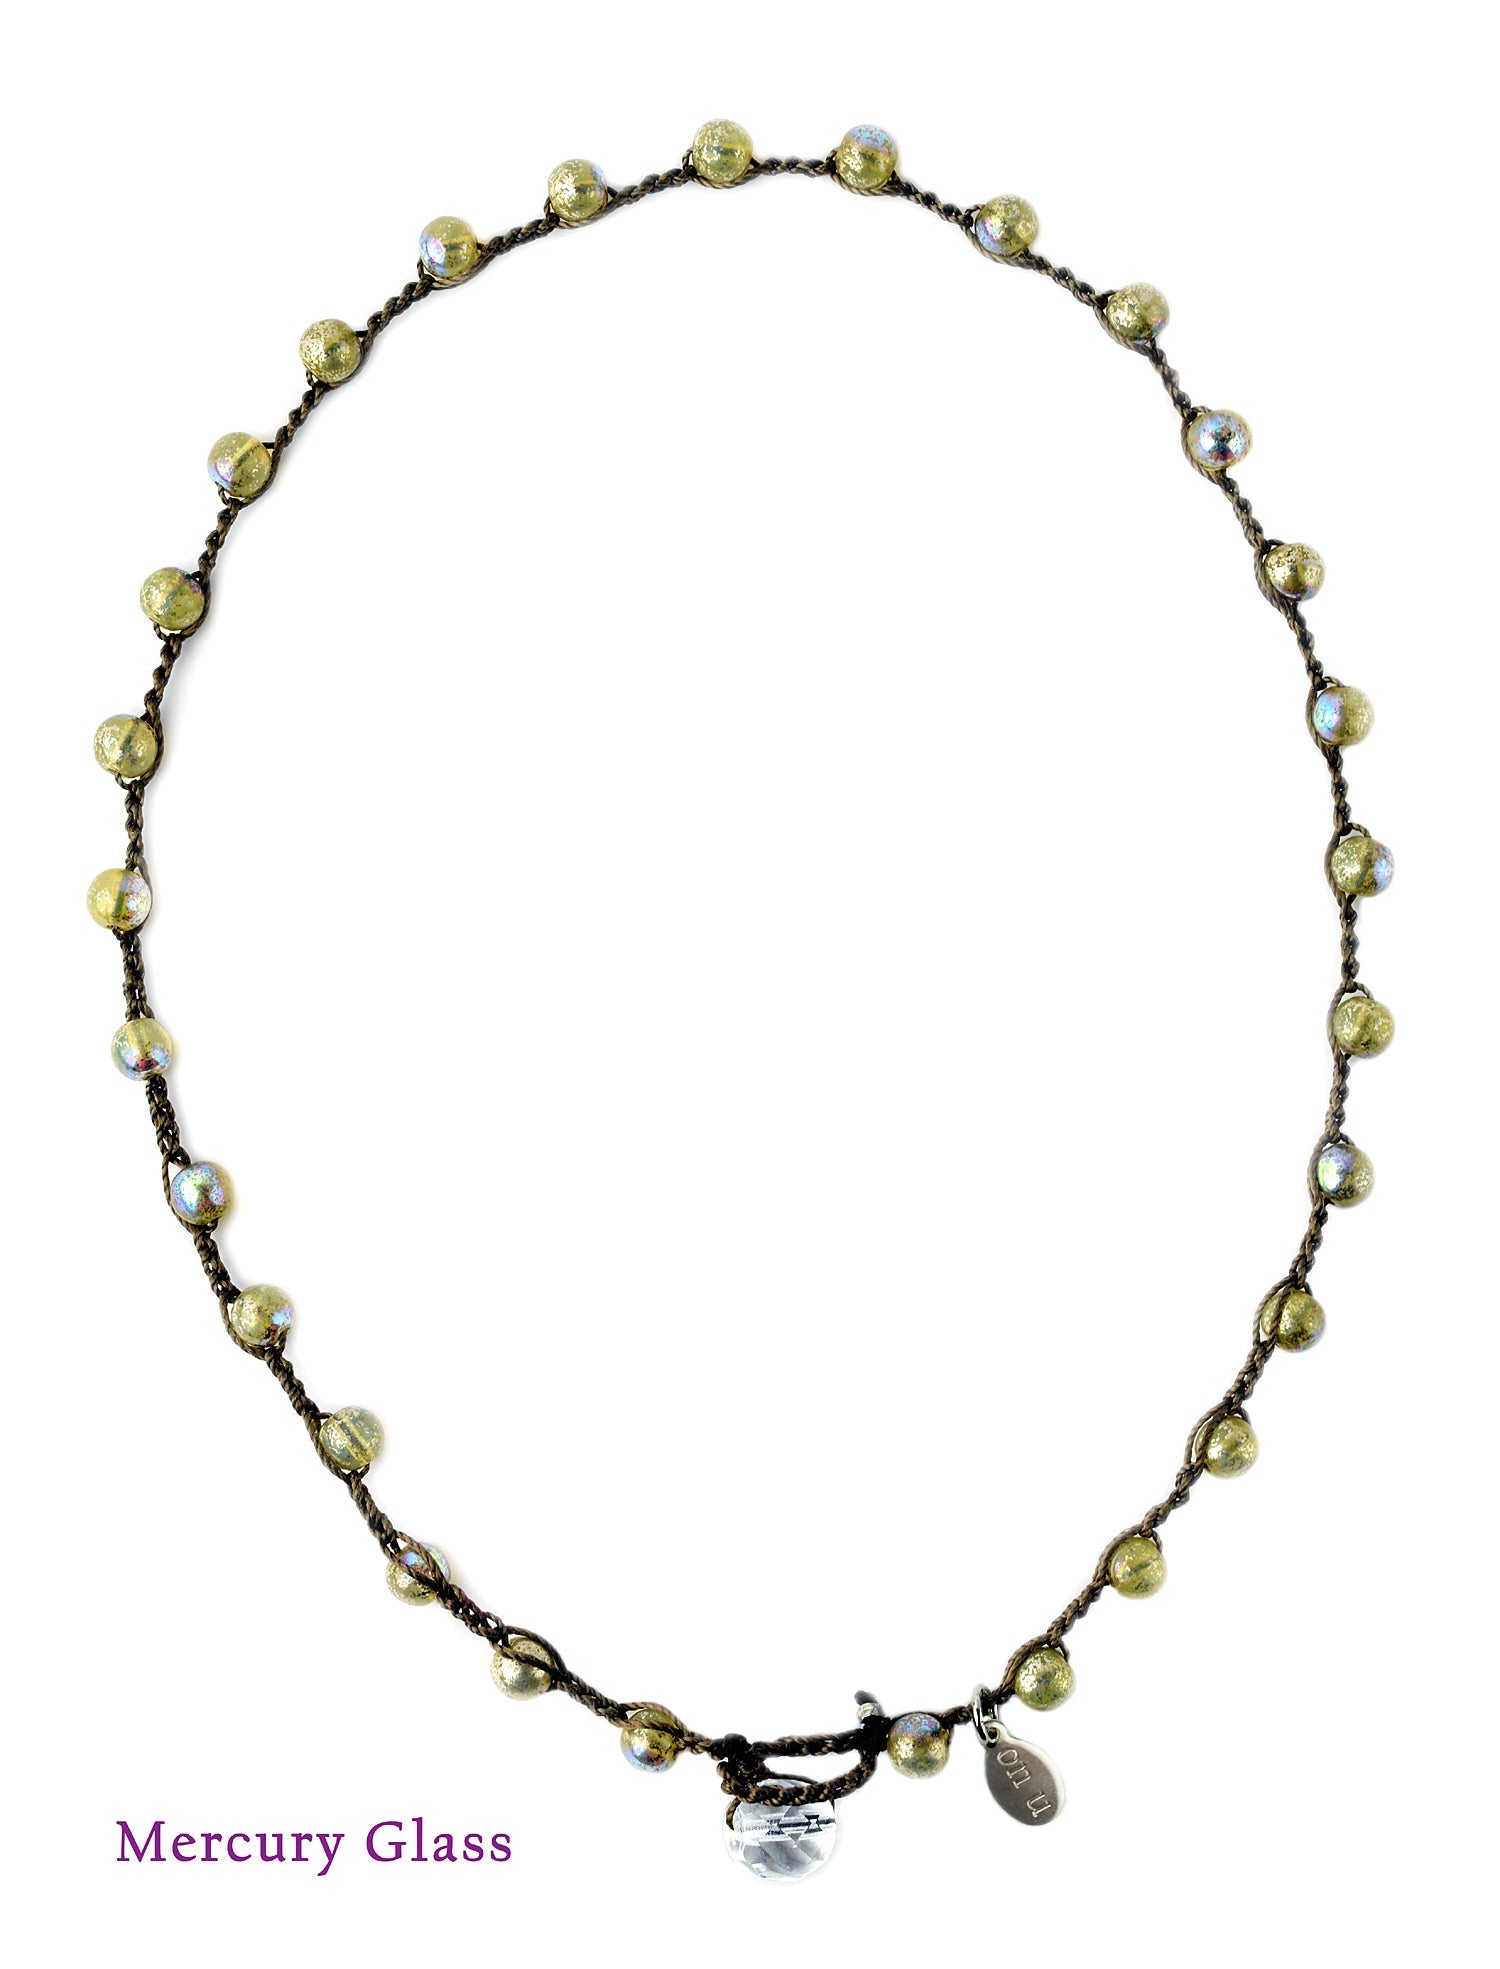 Large Bead Dot Necklace in Mercury Glass. Designed, and created, by Donna Silvestri, On U Jewelry, Richmond, VA